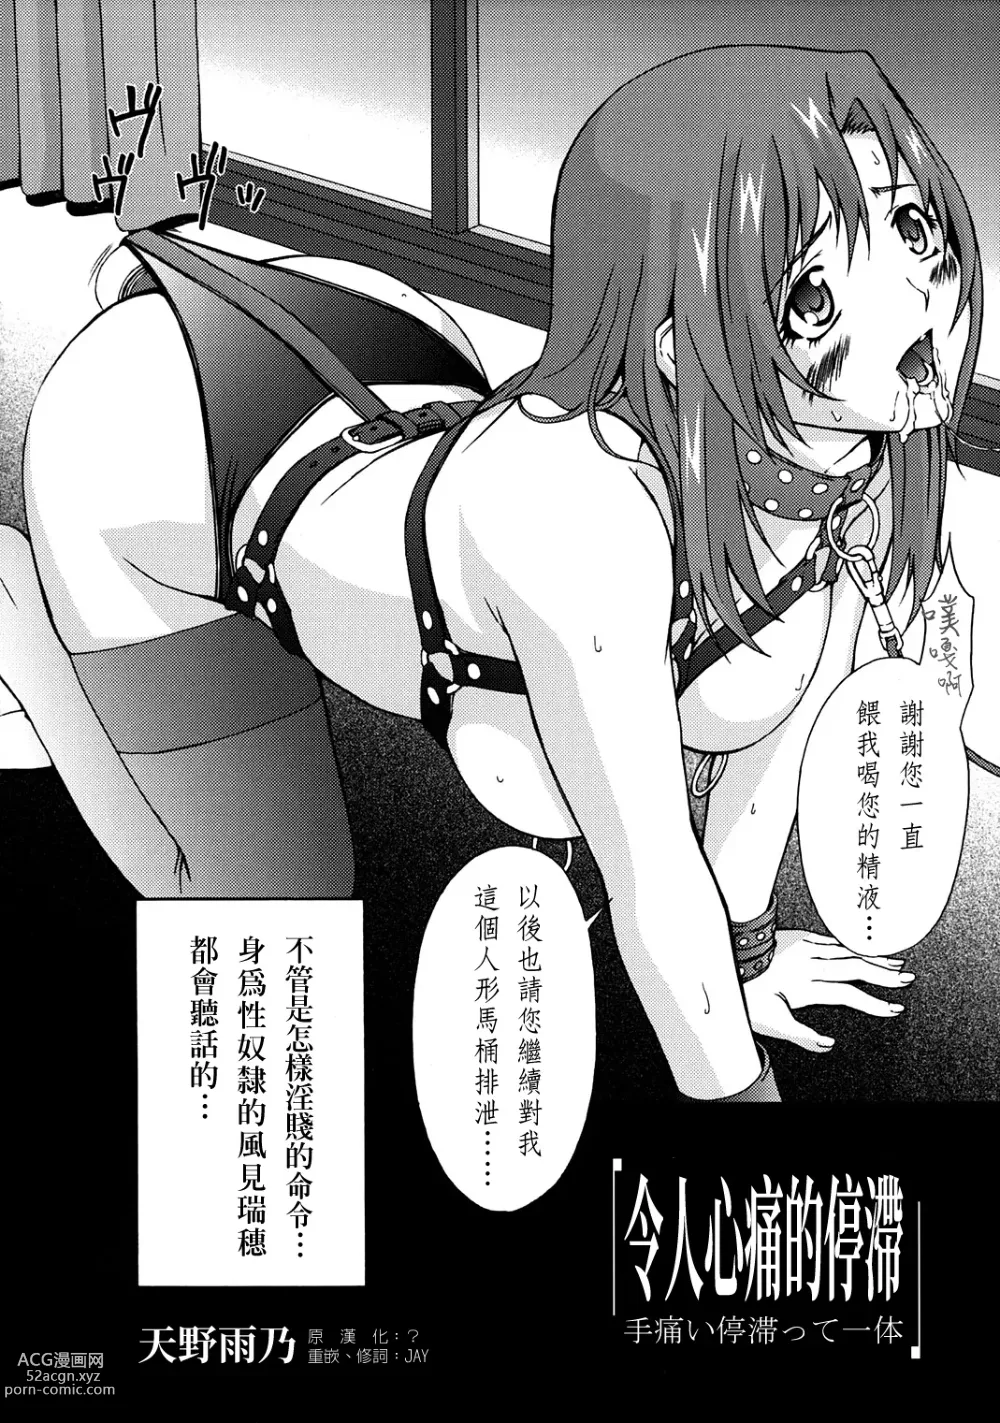 Page 4 of doujinshi OUTLET 13